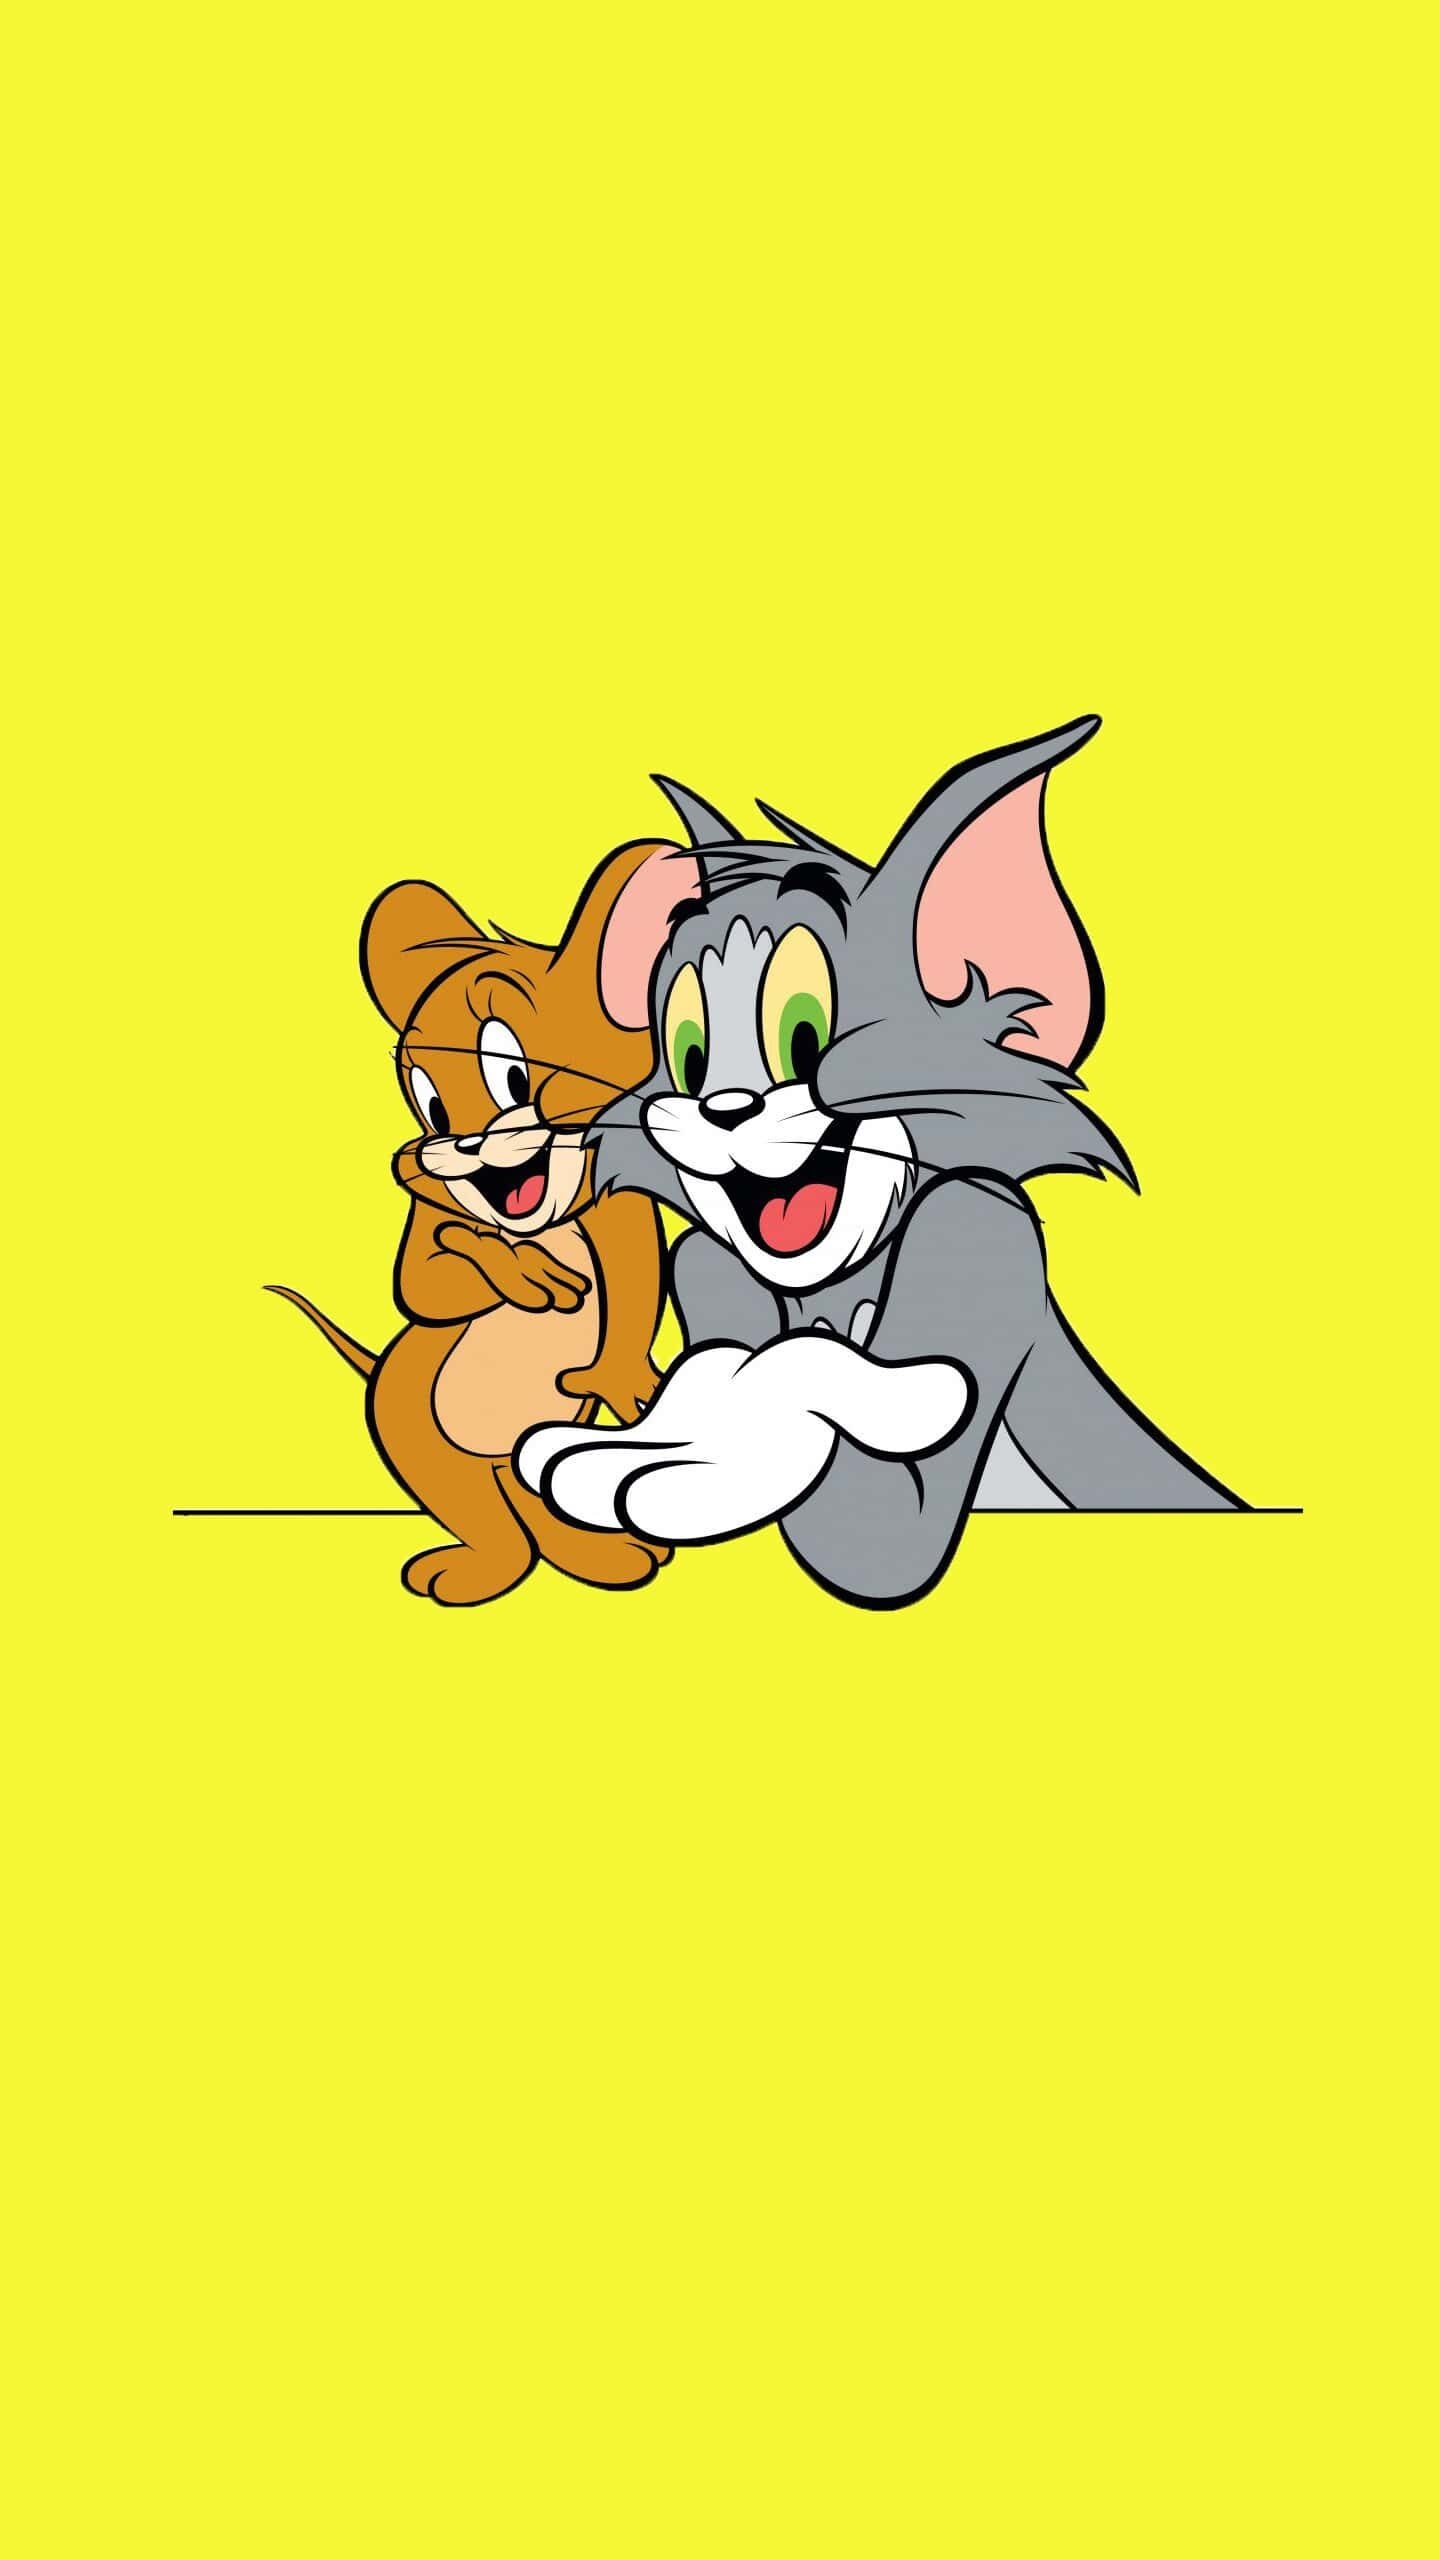 Tom And Jerry Photo With Yellow BG